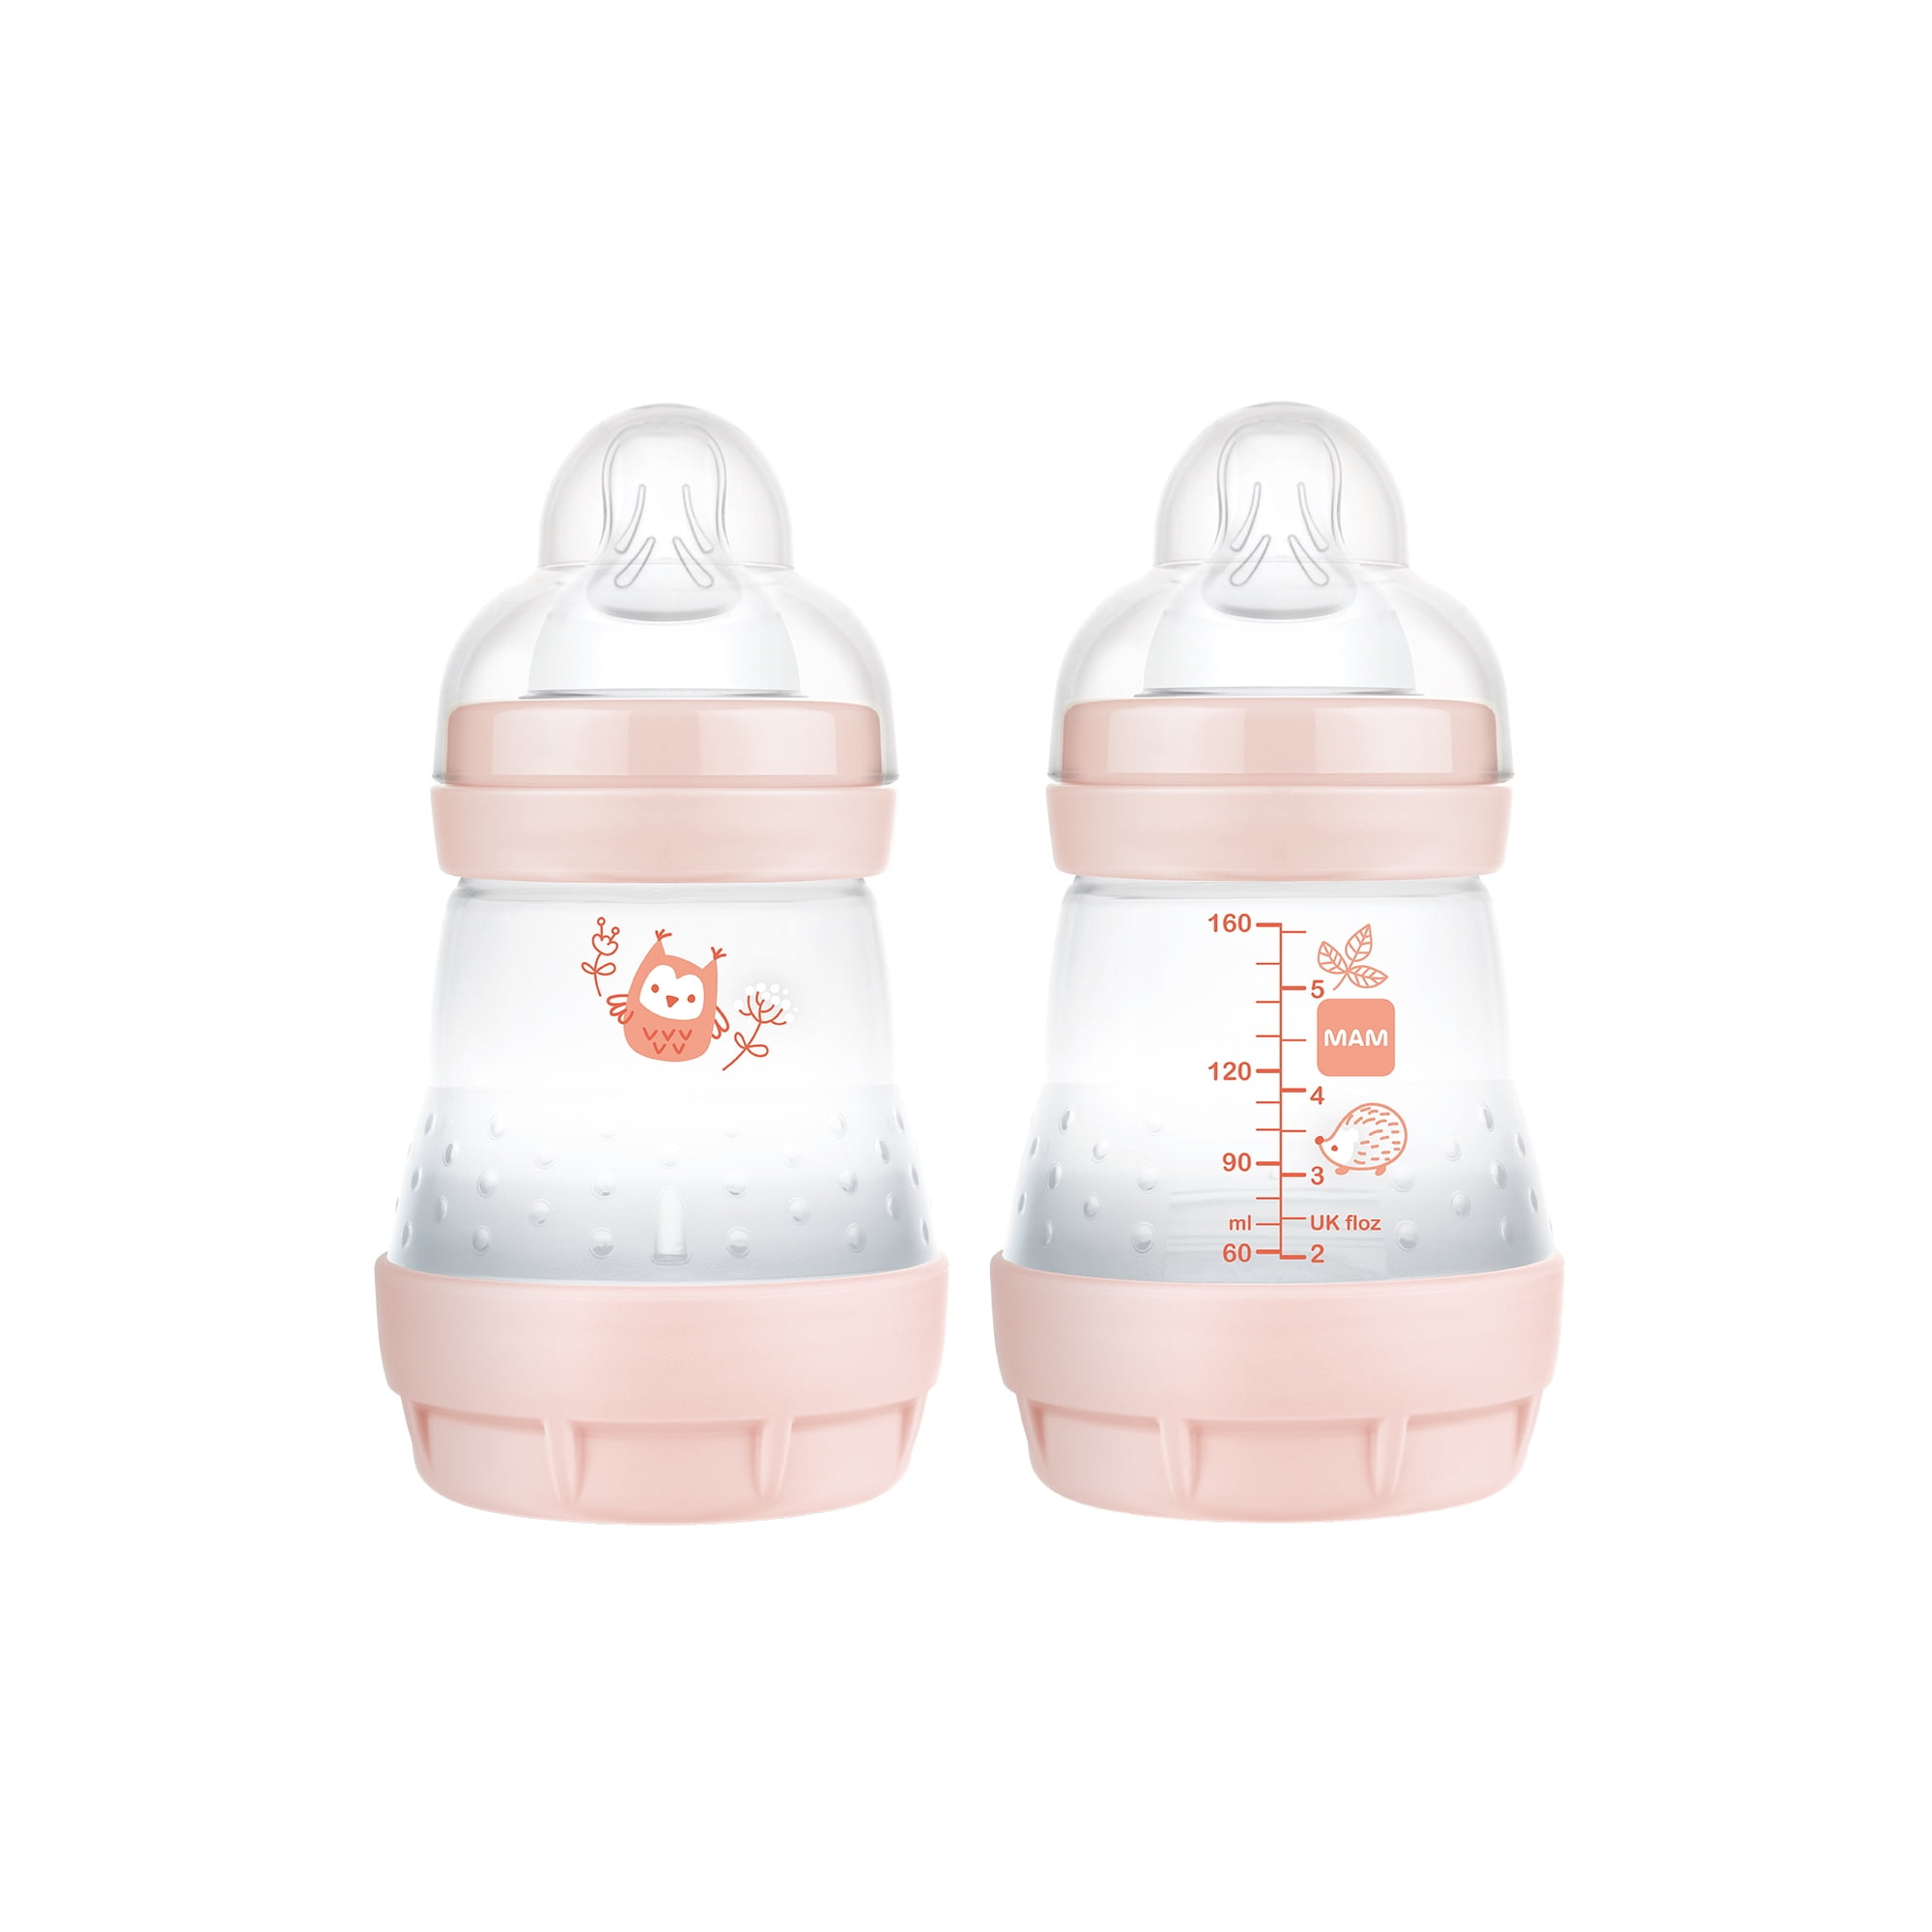 WITLIFCH Anti-Colic Baby Bottles Newborn 2 Pack Wide Neck Bottles 6&10 OZ Baby Bottles for Girls and Boys with Handle Clear BPA-Free Feeding Bottle Gift Set